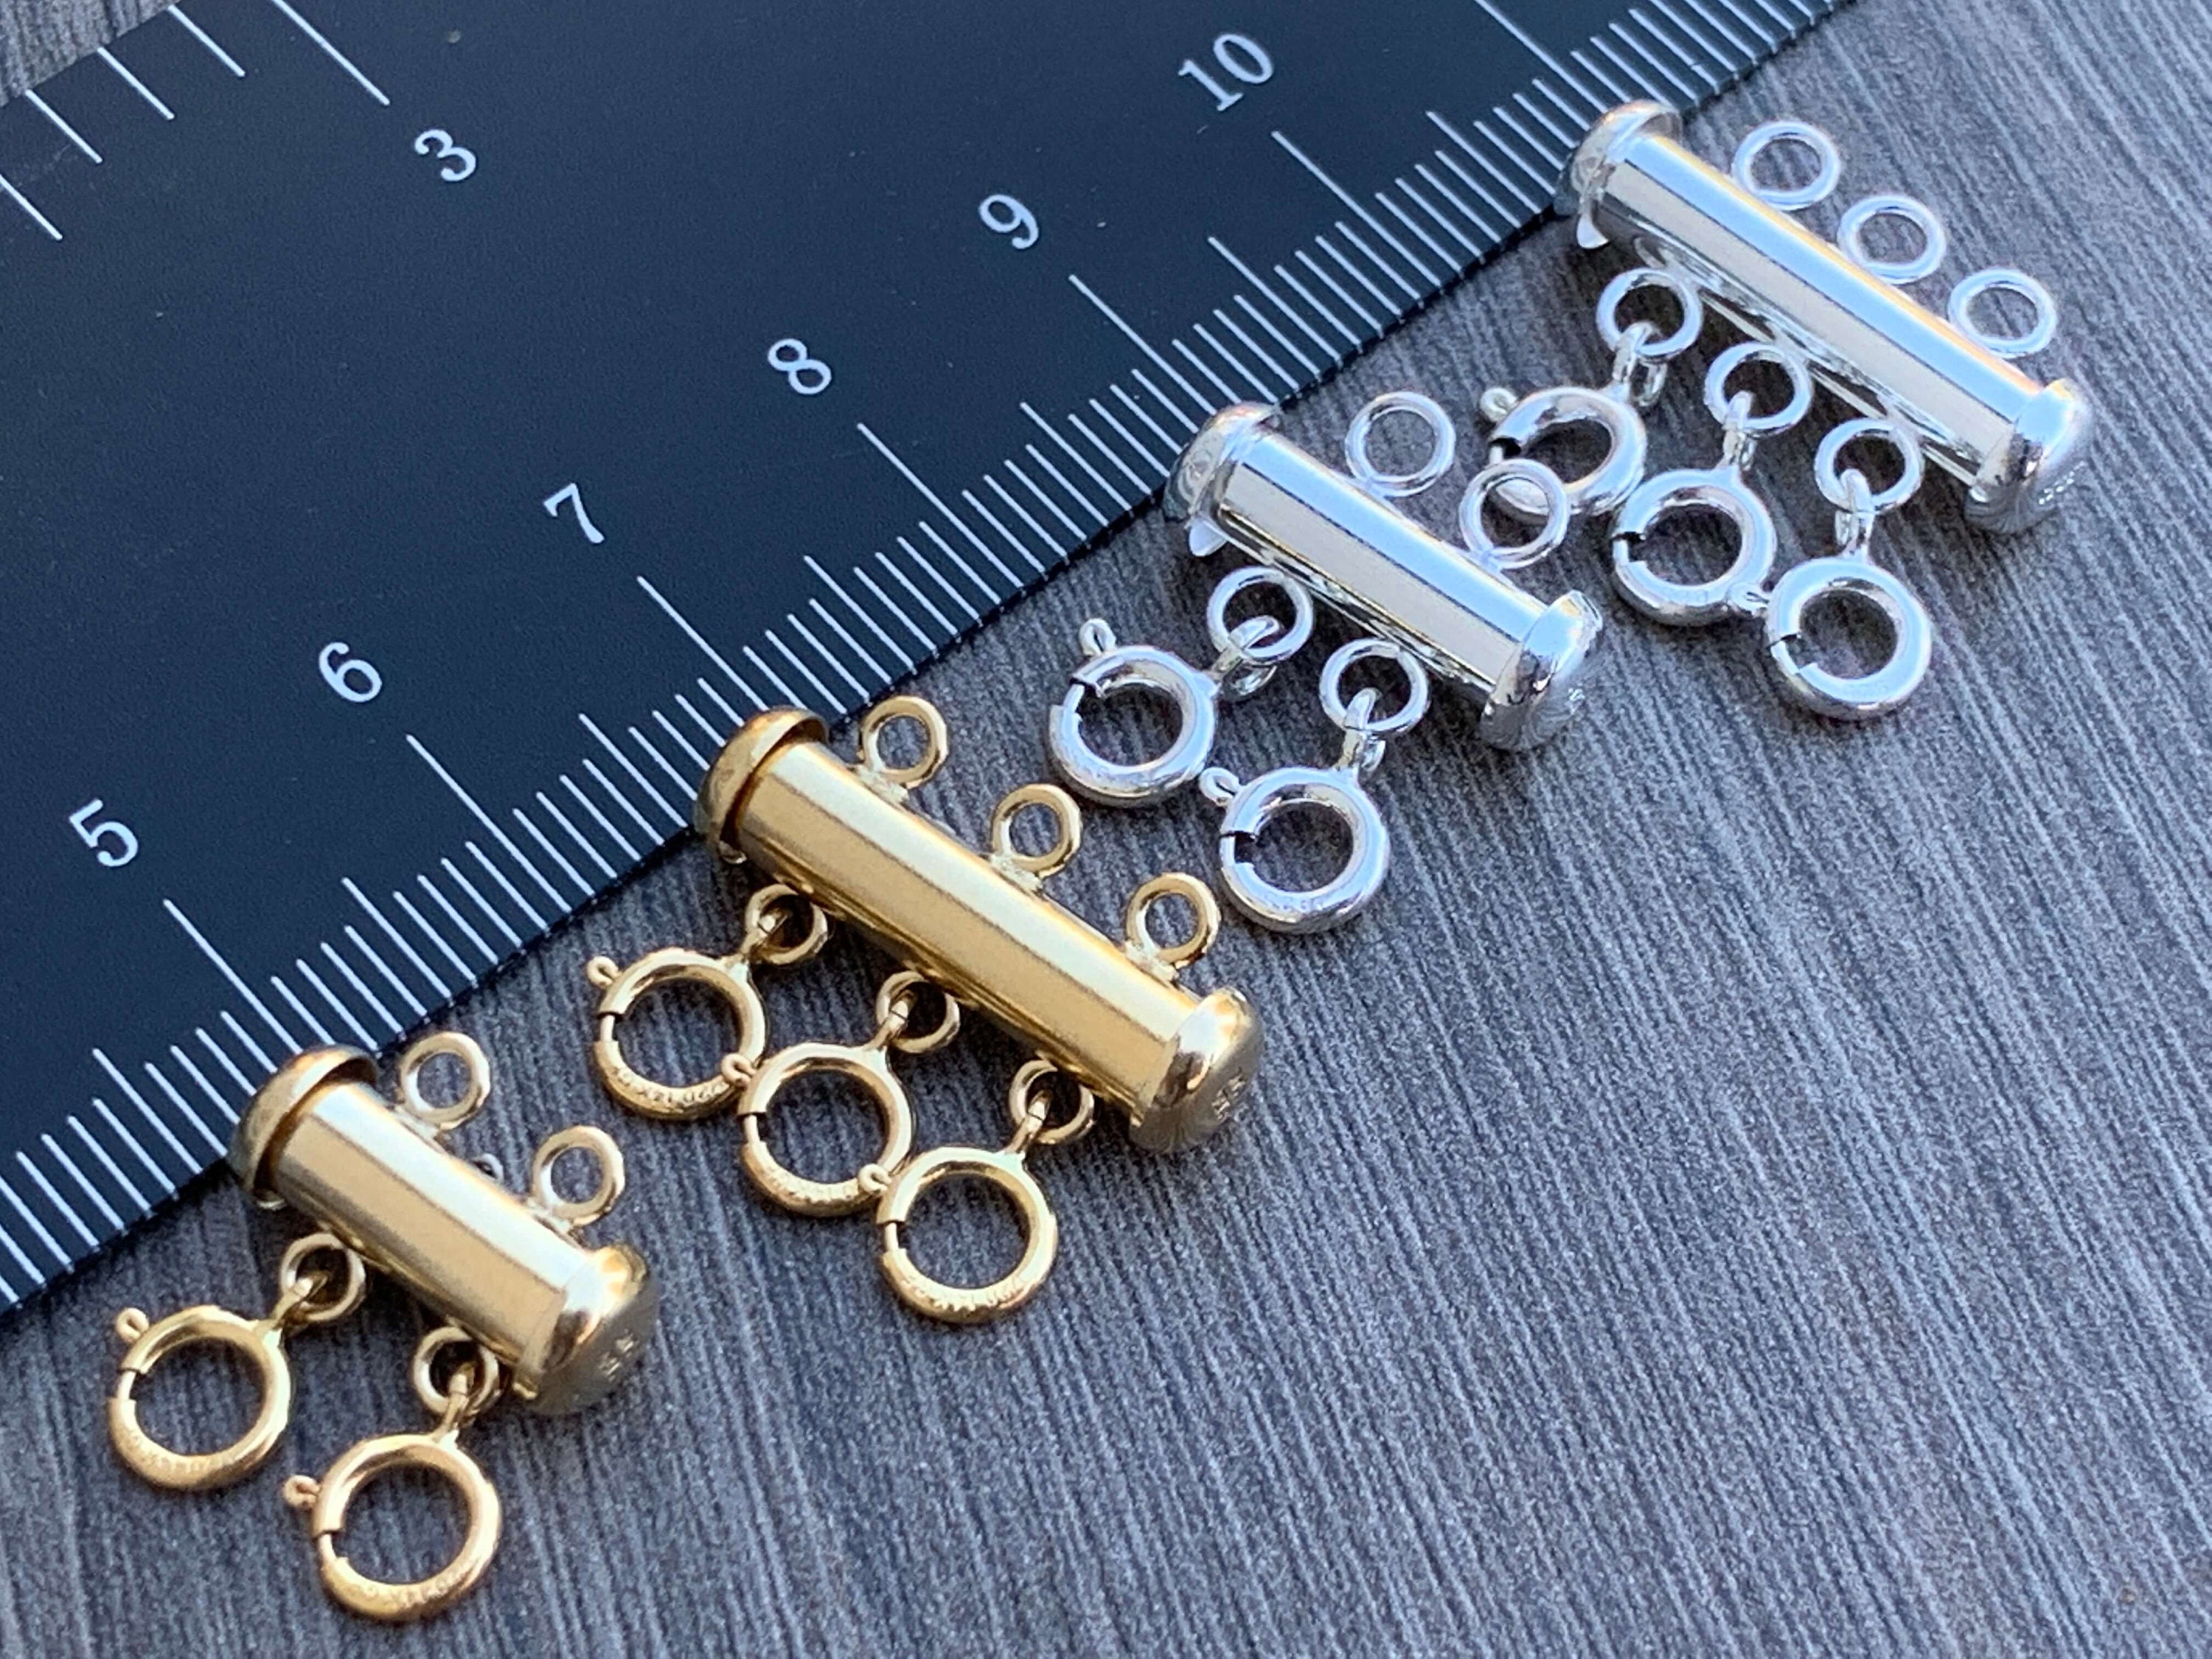 14/20 Gold Fill Multi Strand Clasp- Jewelry Findings. Multi Strand  Connector, Gold Fill Findings